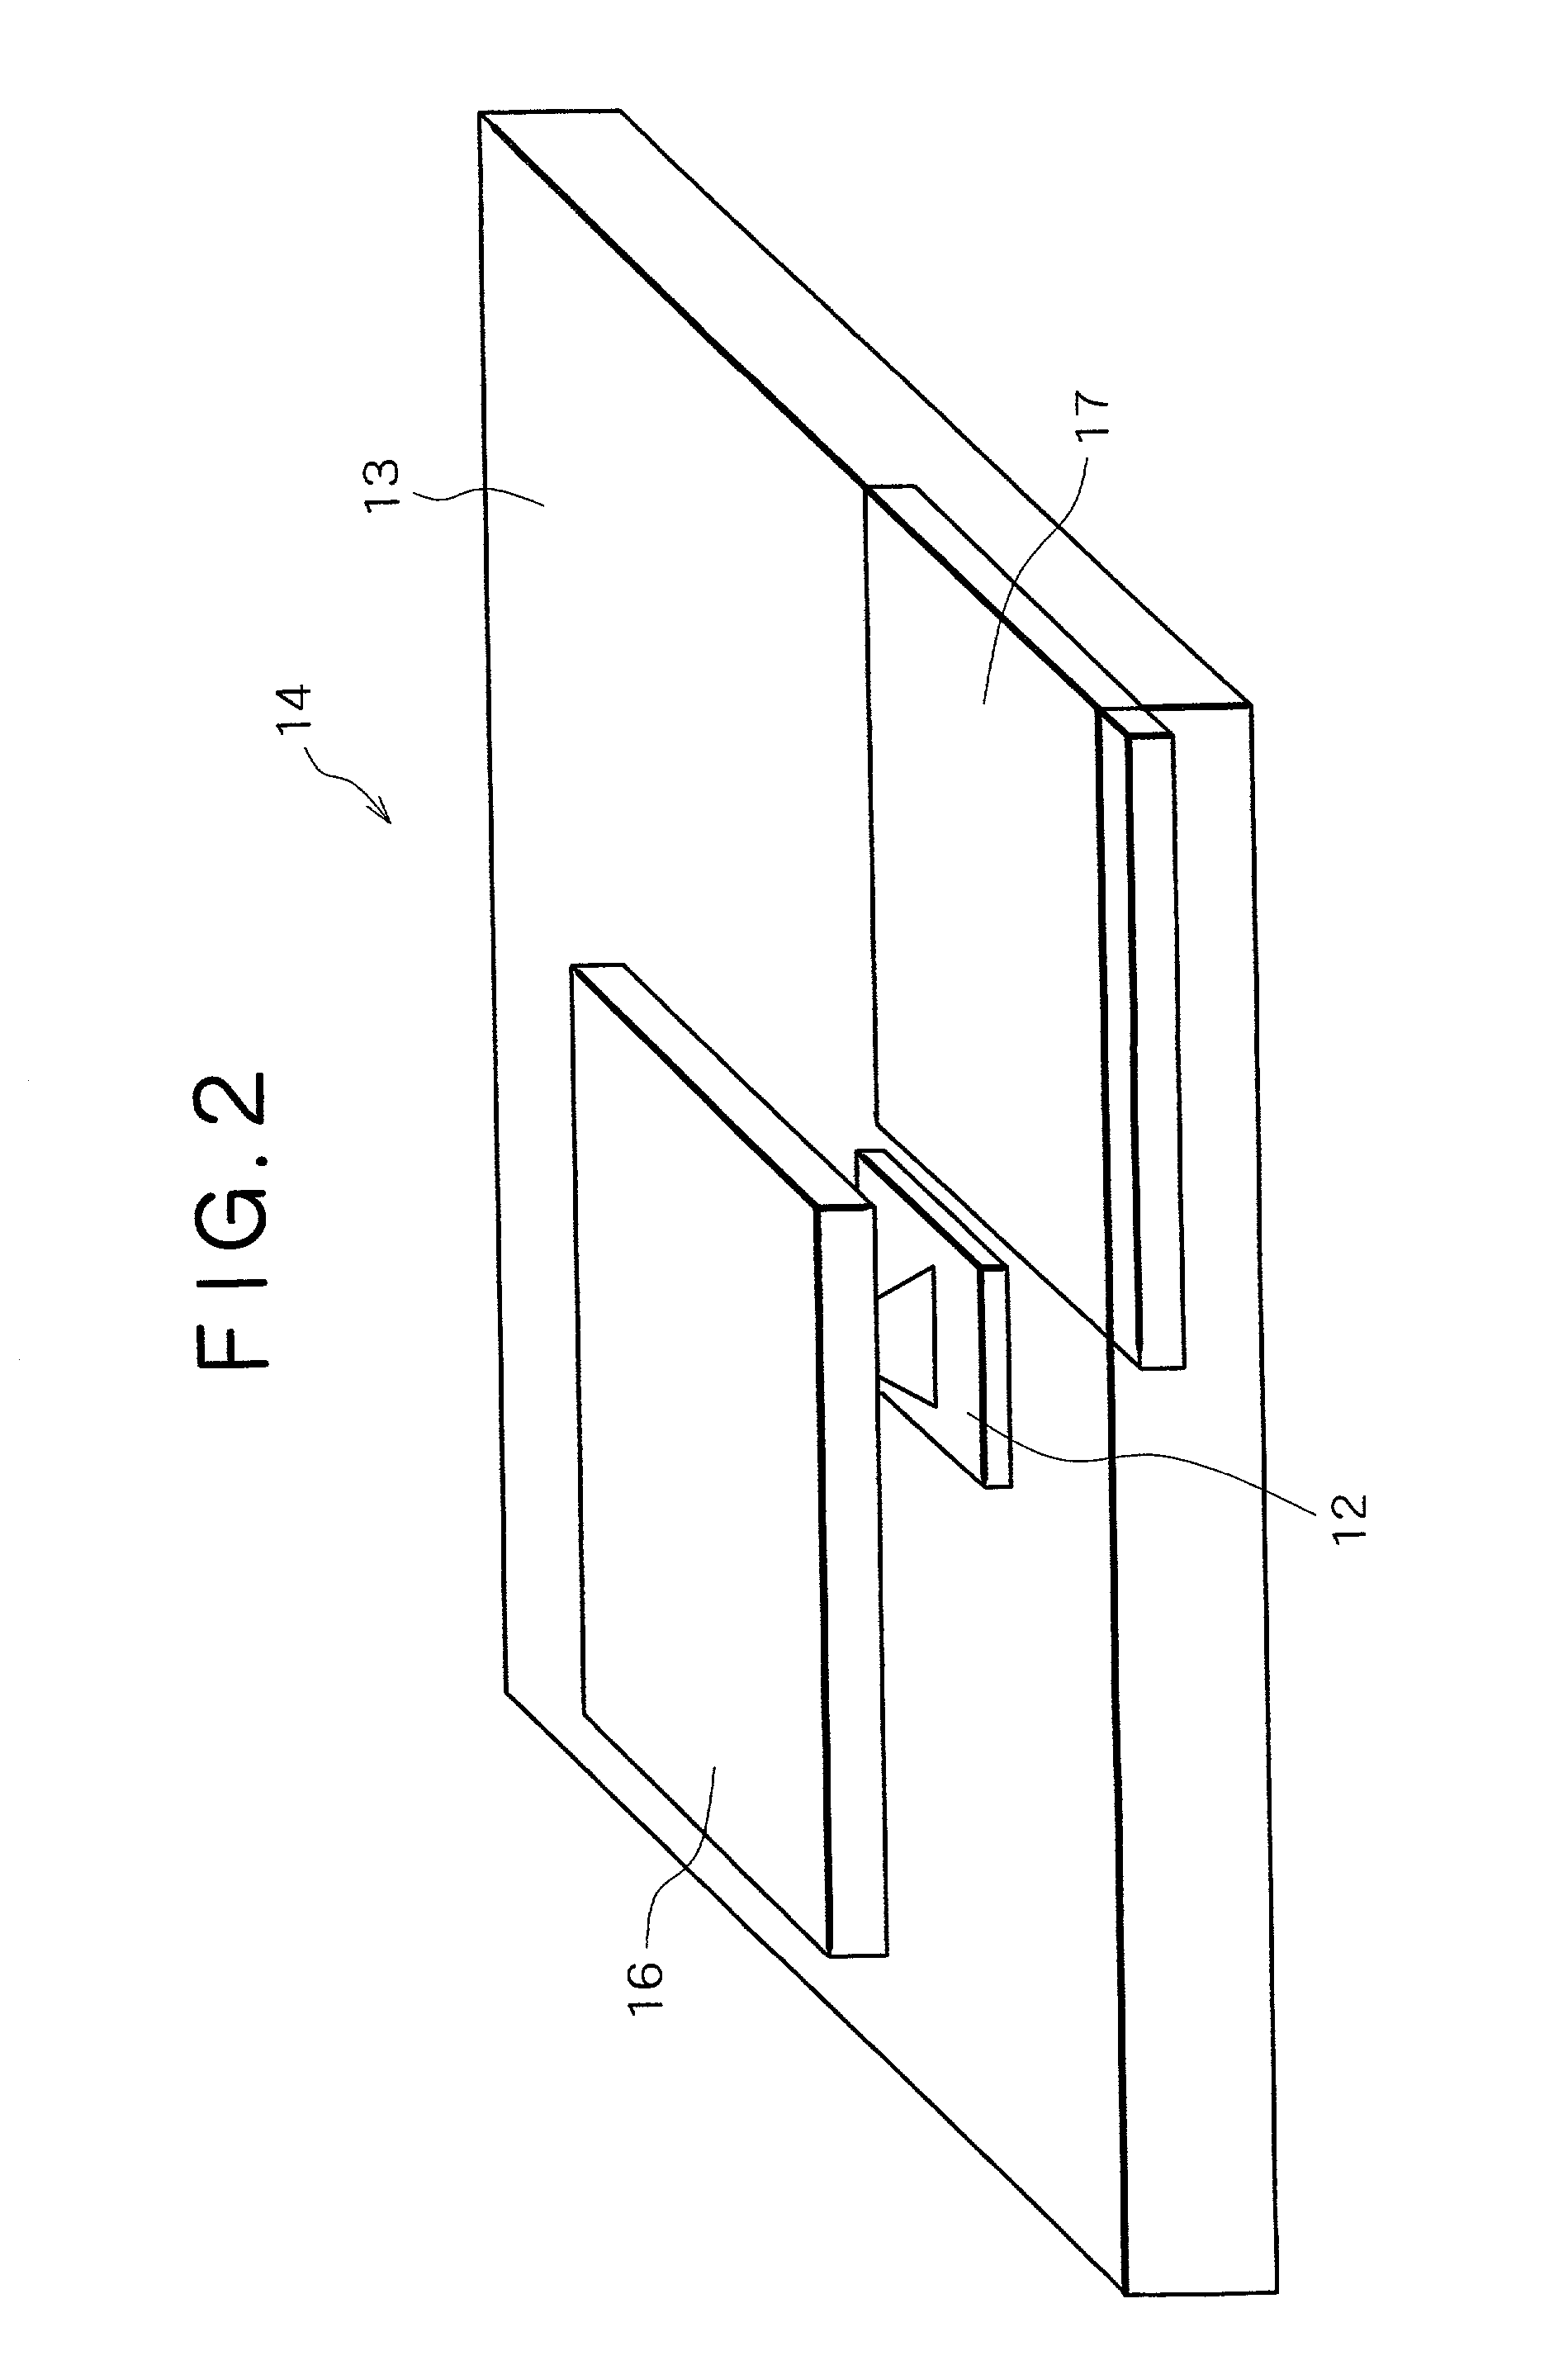 Device mounting substrate and method of repairing defective device